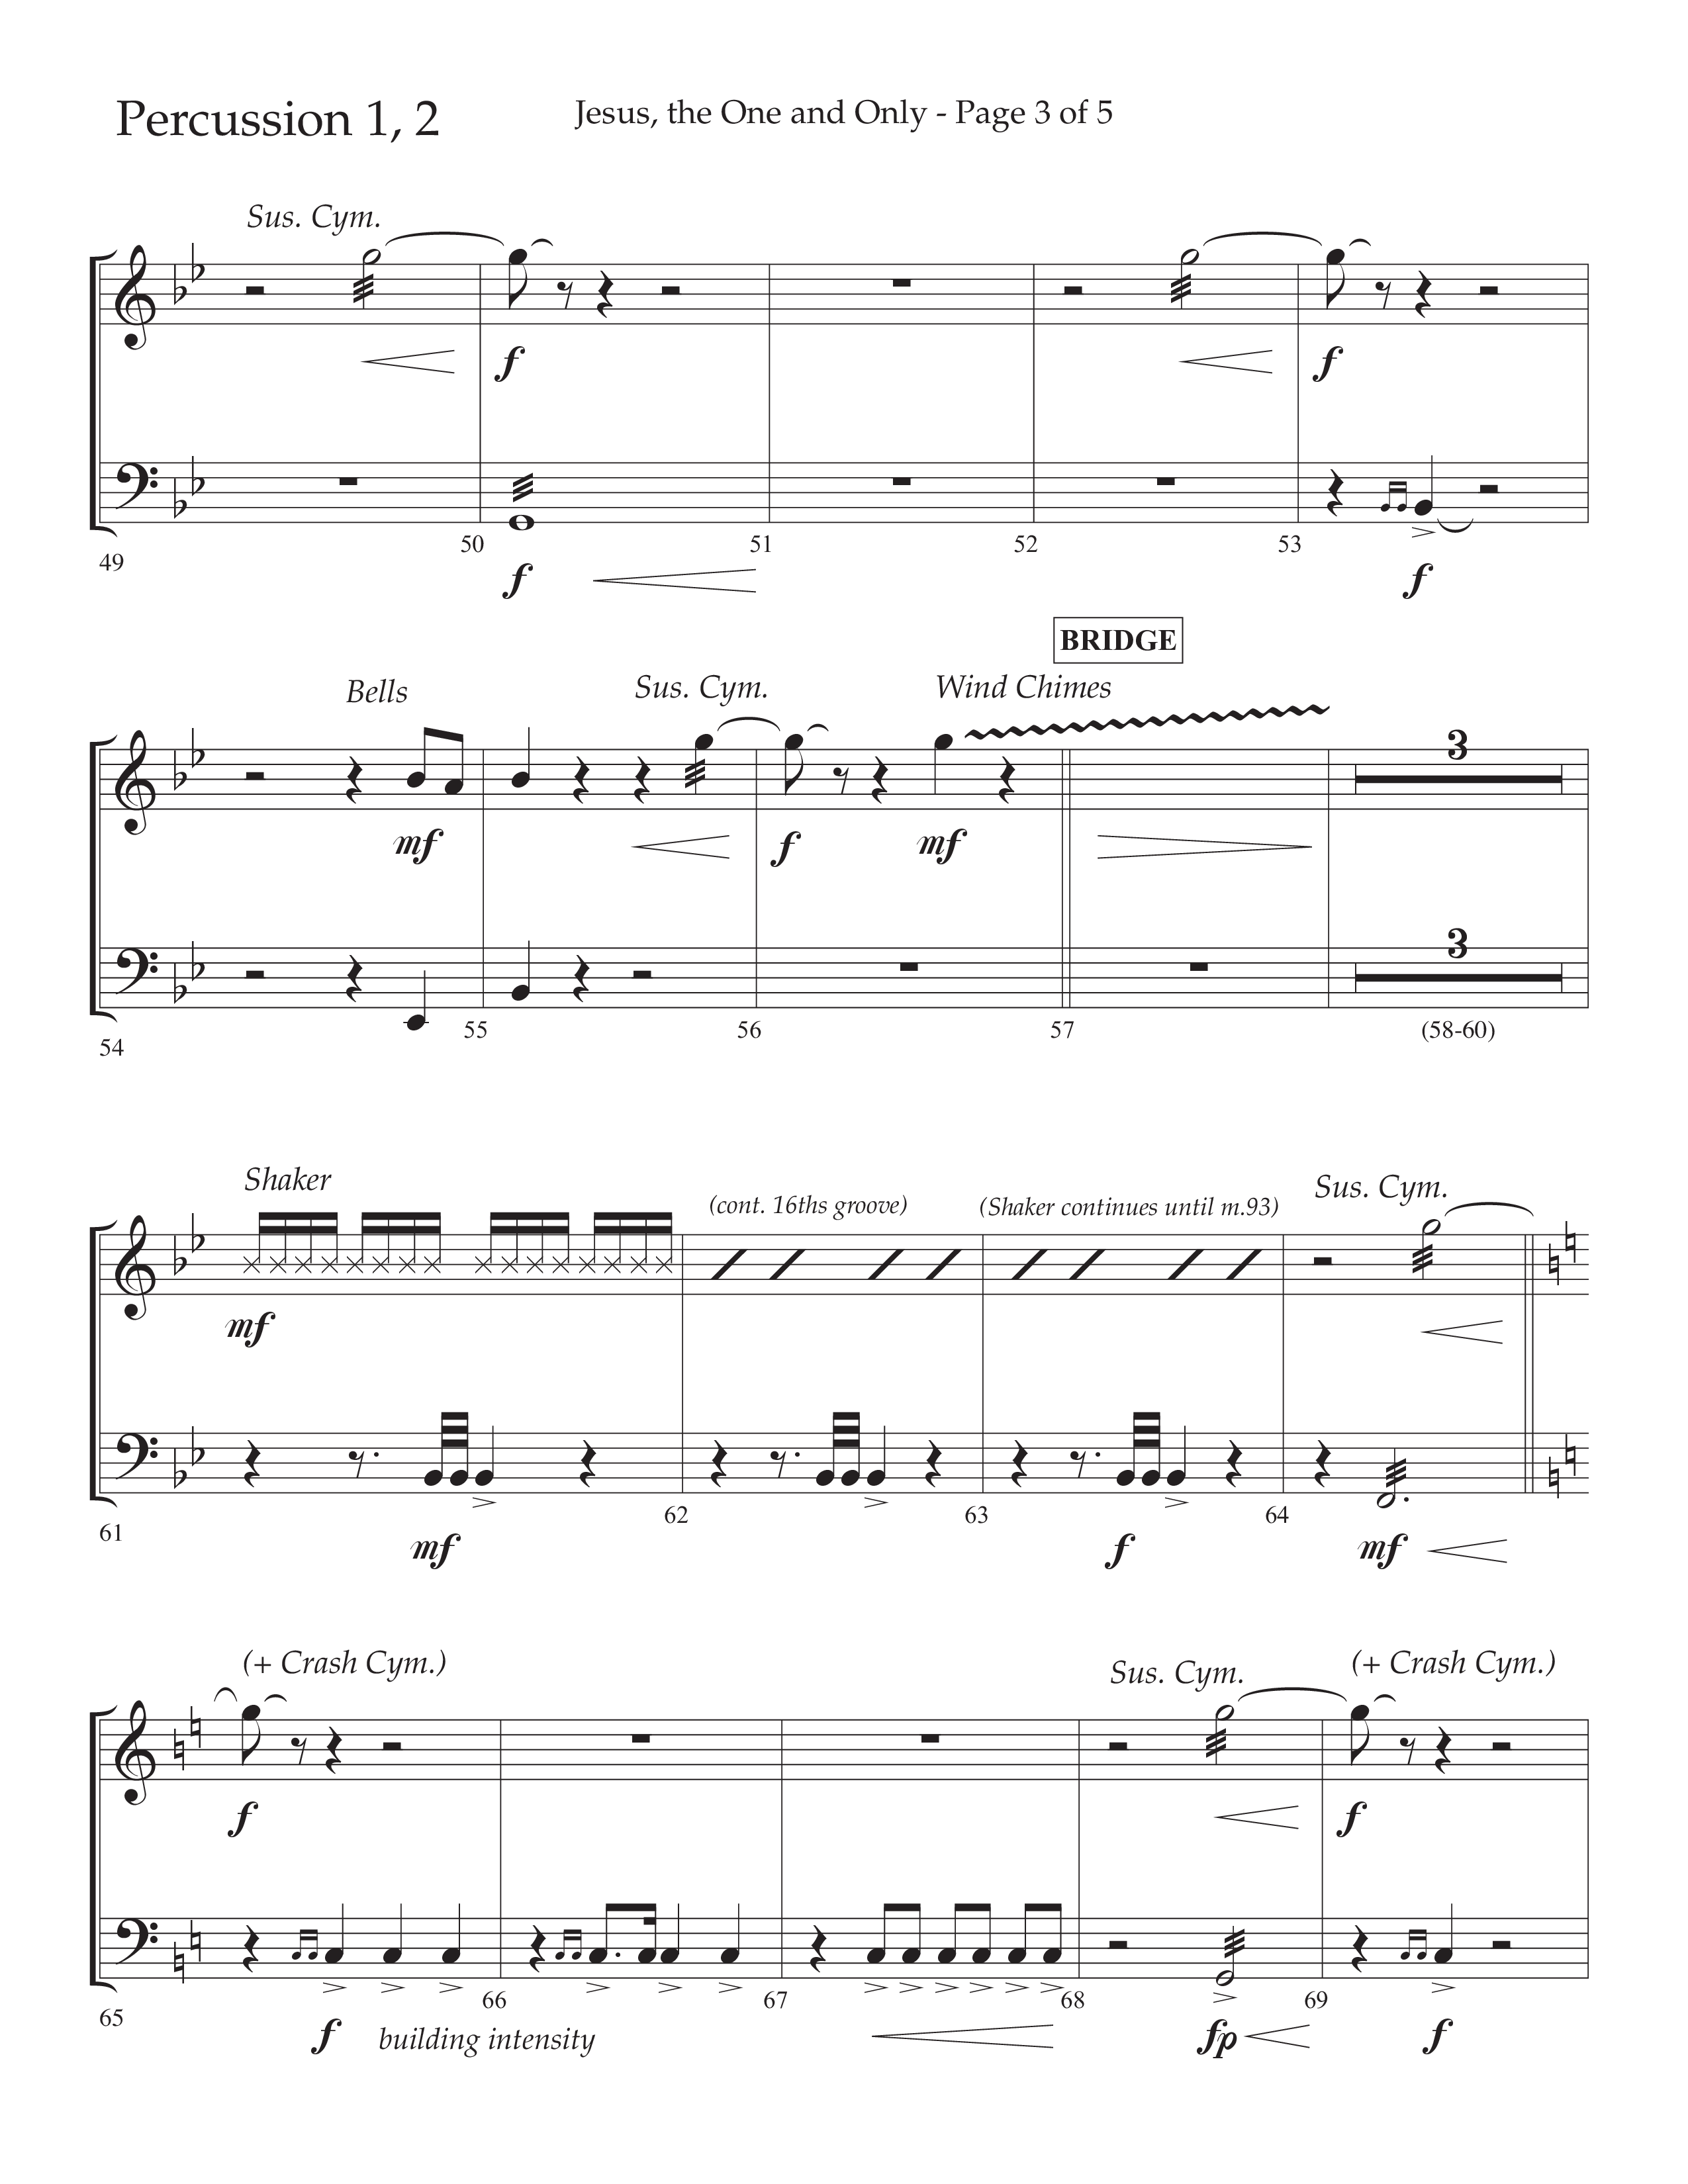 Jesus The One And Only (Choral Anthem SATB) Percussion 1/2 (Lifeway Choral / Arr. John Bolin / Arr. Don Koch / Orch. David Shipps)